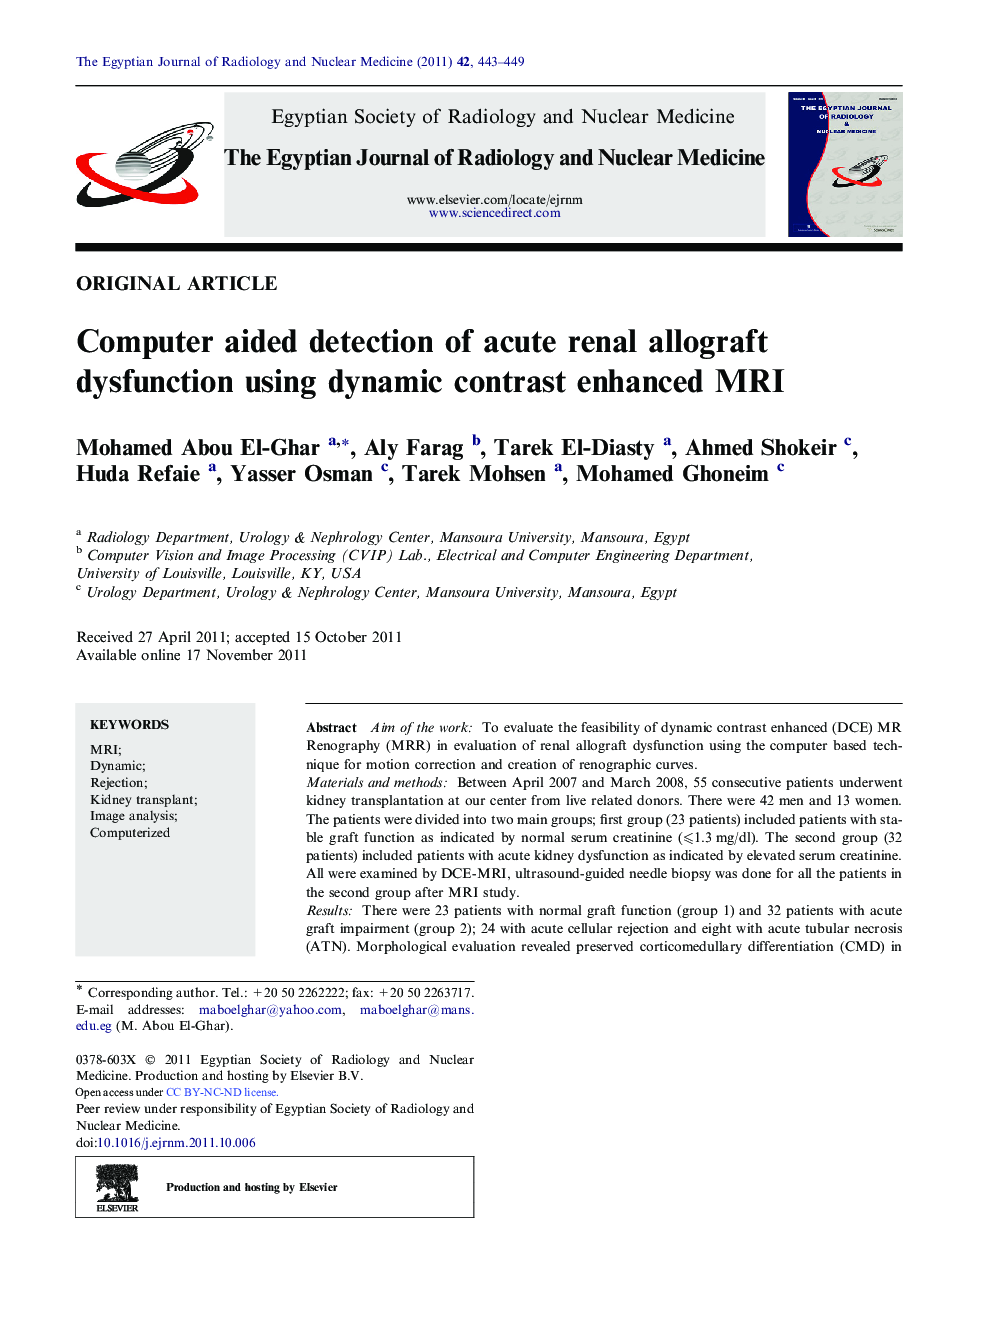 Computer aided detection of acute renal allograft dysfunction using dynamic contrast enhanced MRI 